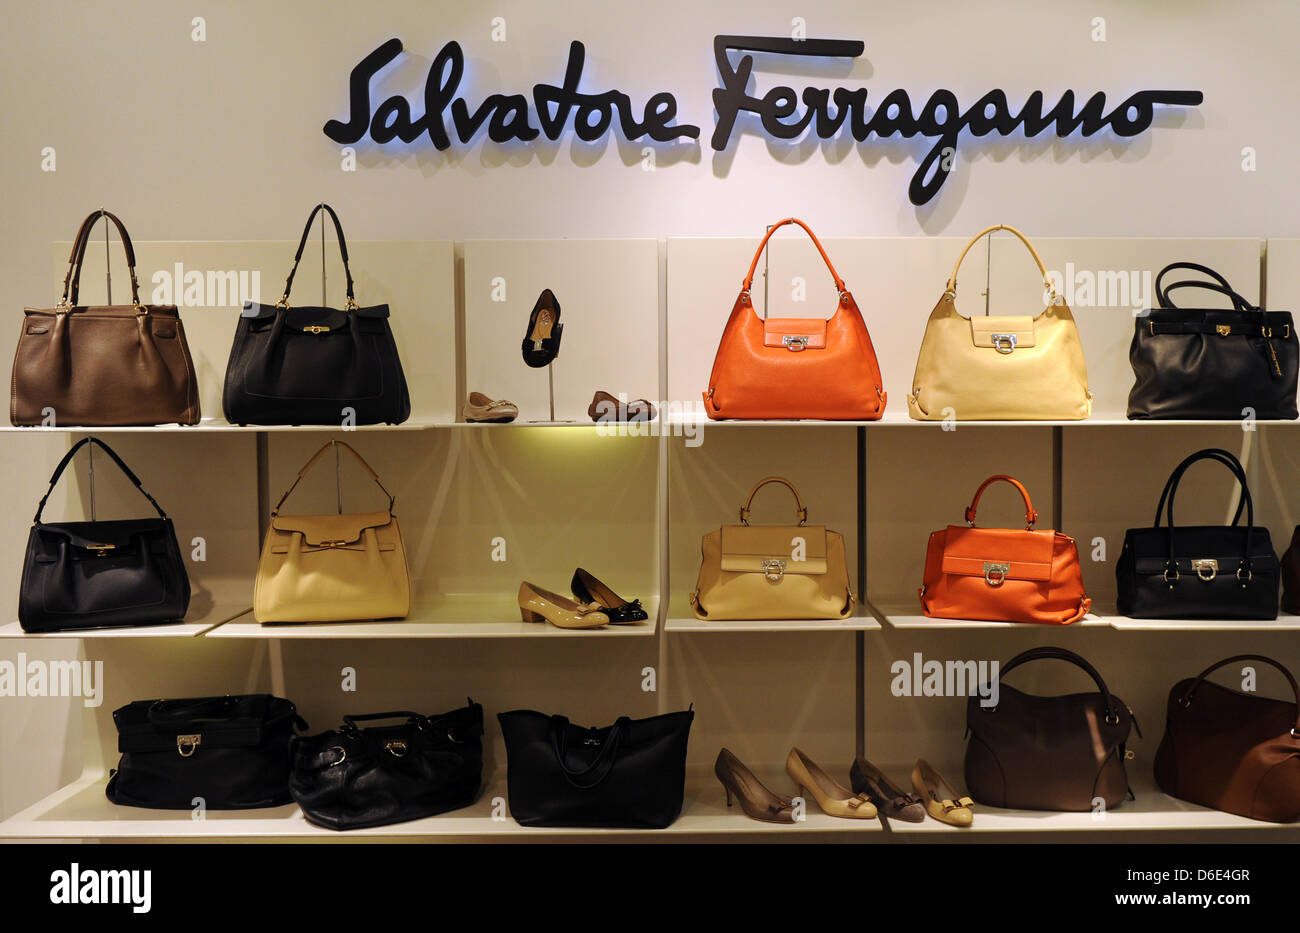 Handbags and shoes of luxury brand Salvatore Ferragamo, pictured on 18 January 2012 in Berlin, Germany. Foto: Jens Kalaene dpa/lbn Stock Photo